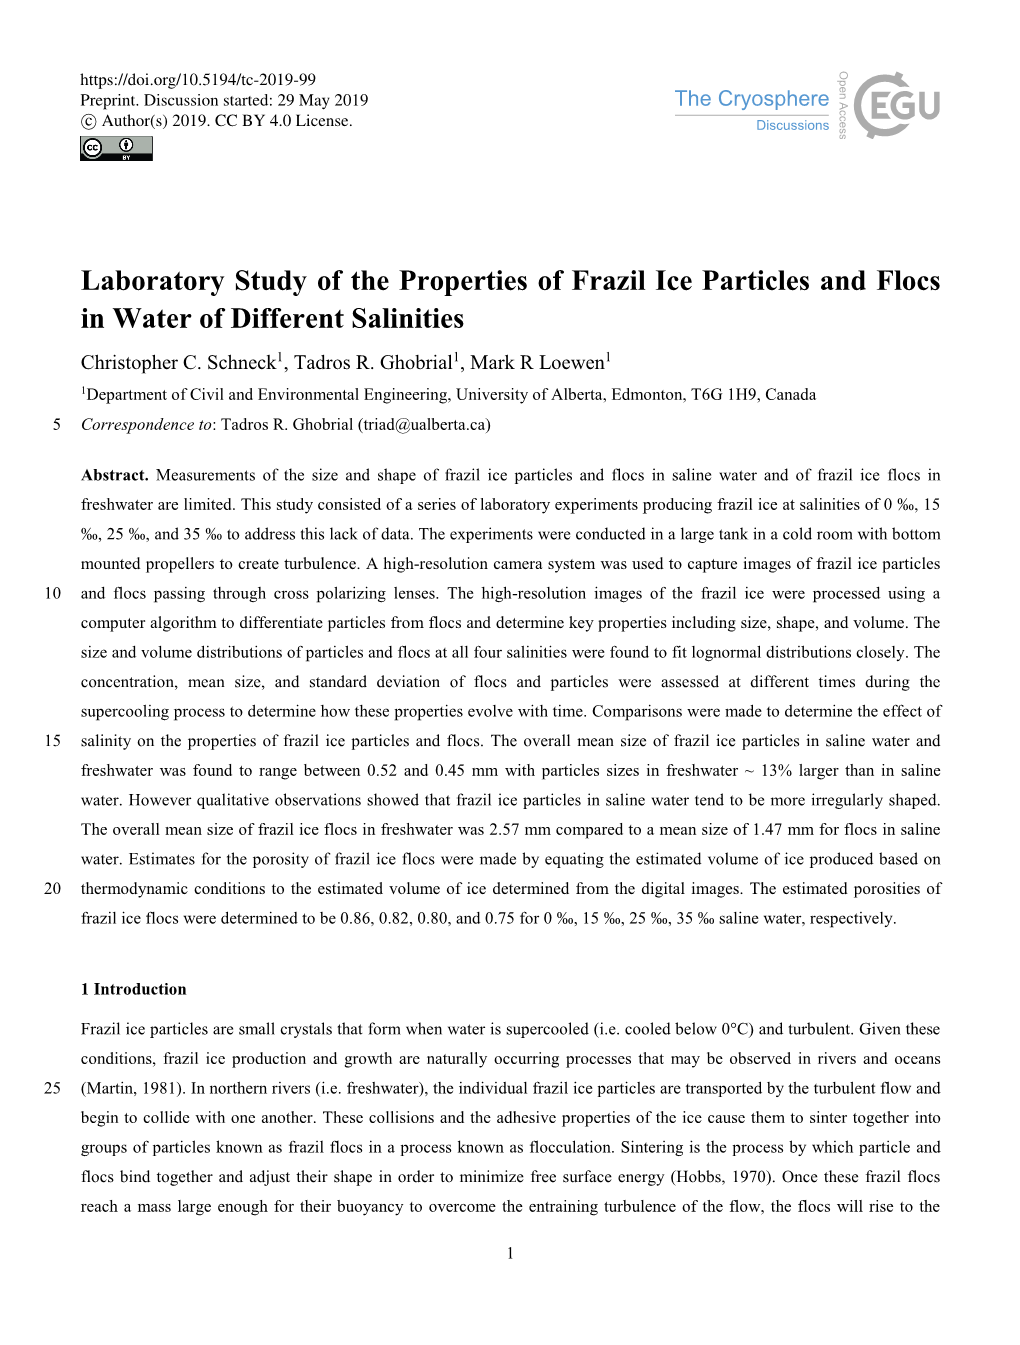 Laboratory Study of the Properties of Frazil Ice Particles and Flocs in Water of Different Salinities Christopher C